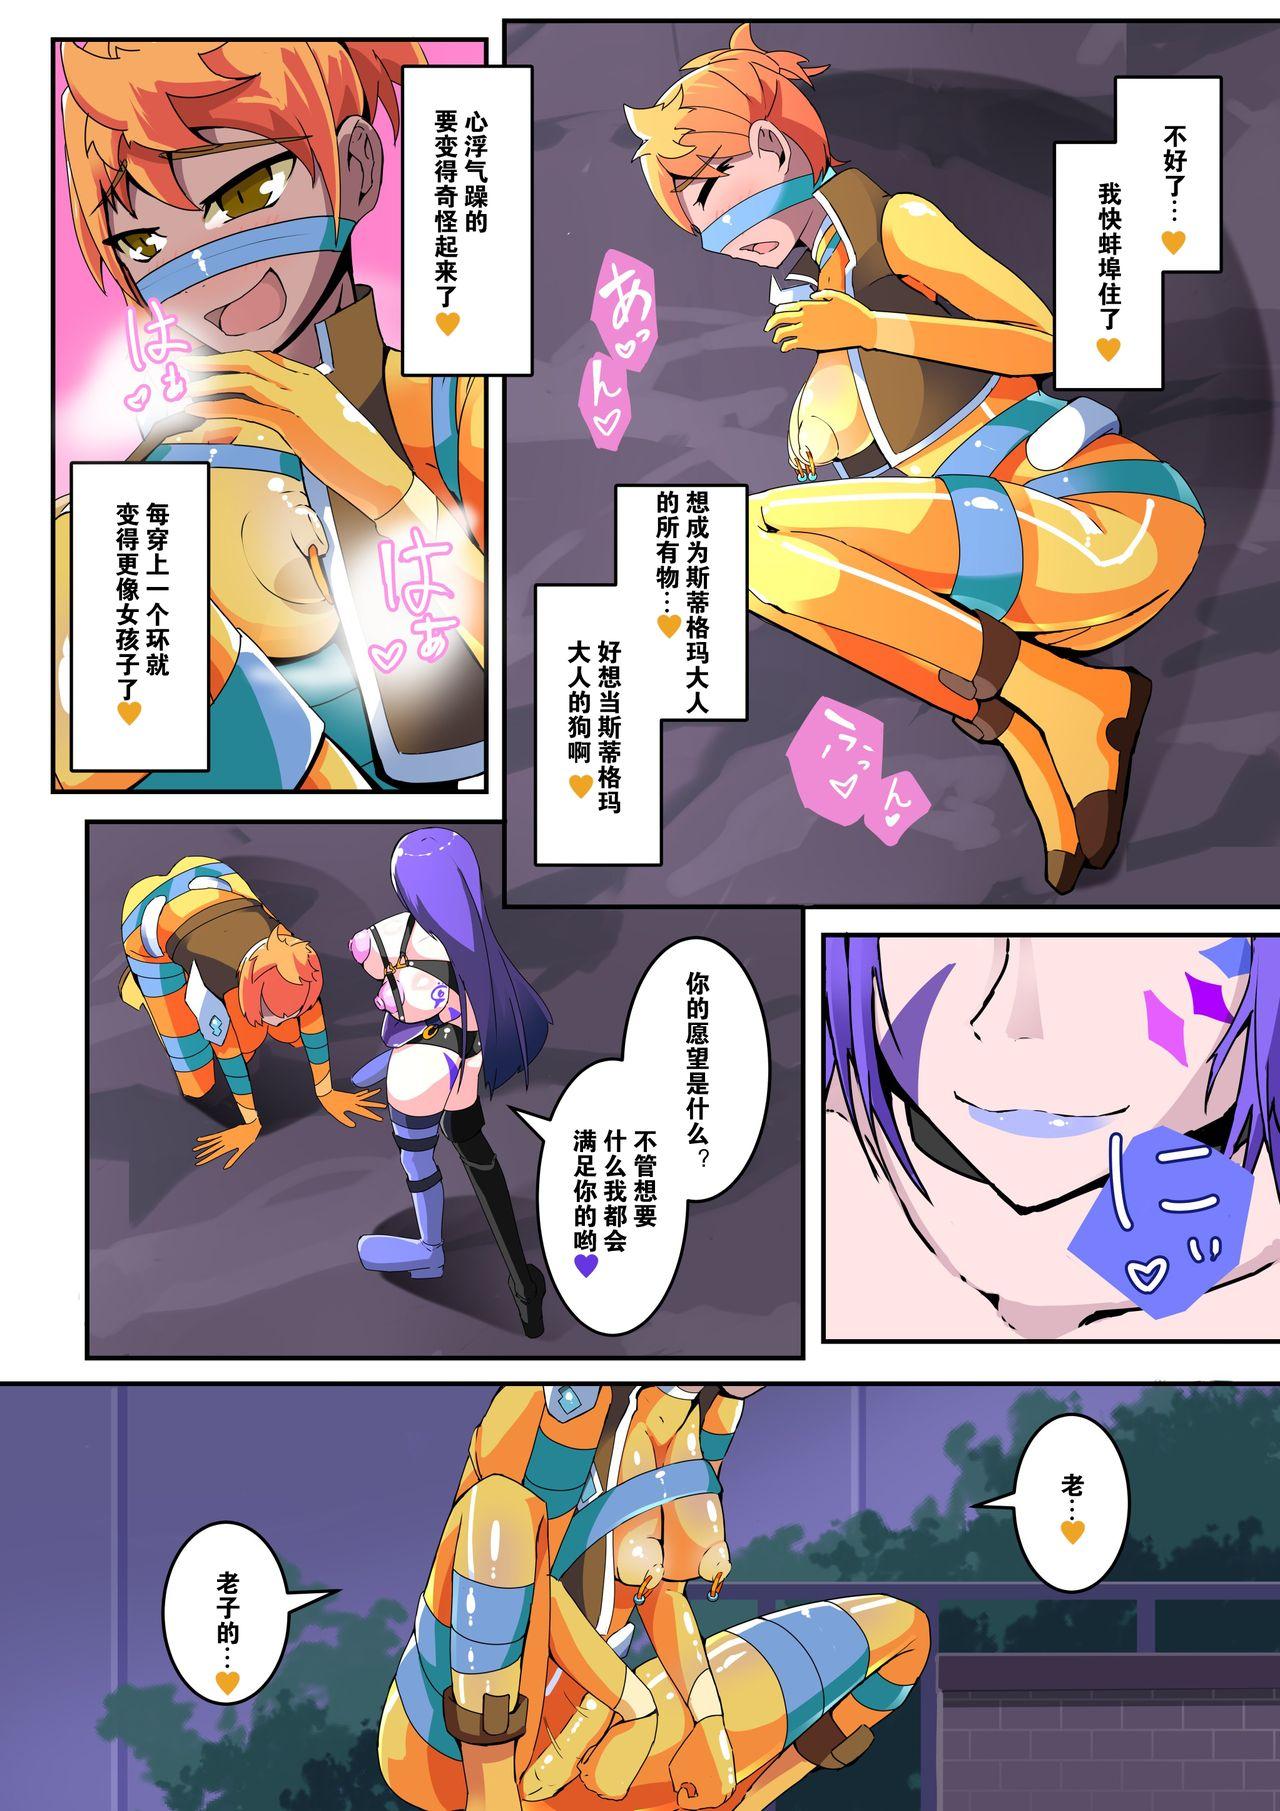 Butts Maso Seiki Fifth Elements 1 - Original Phat - Page 11